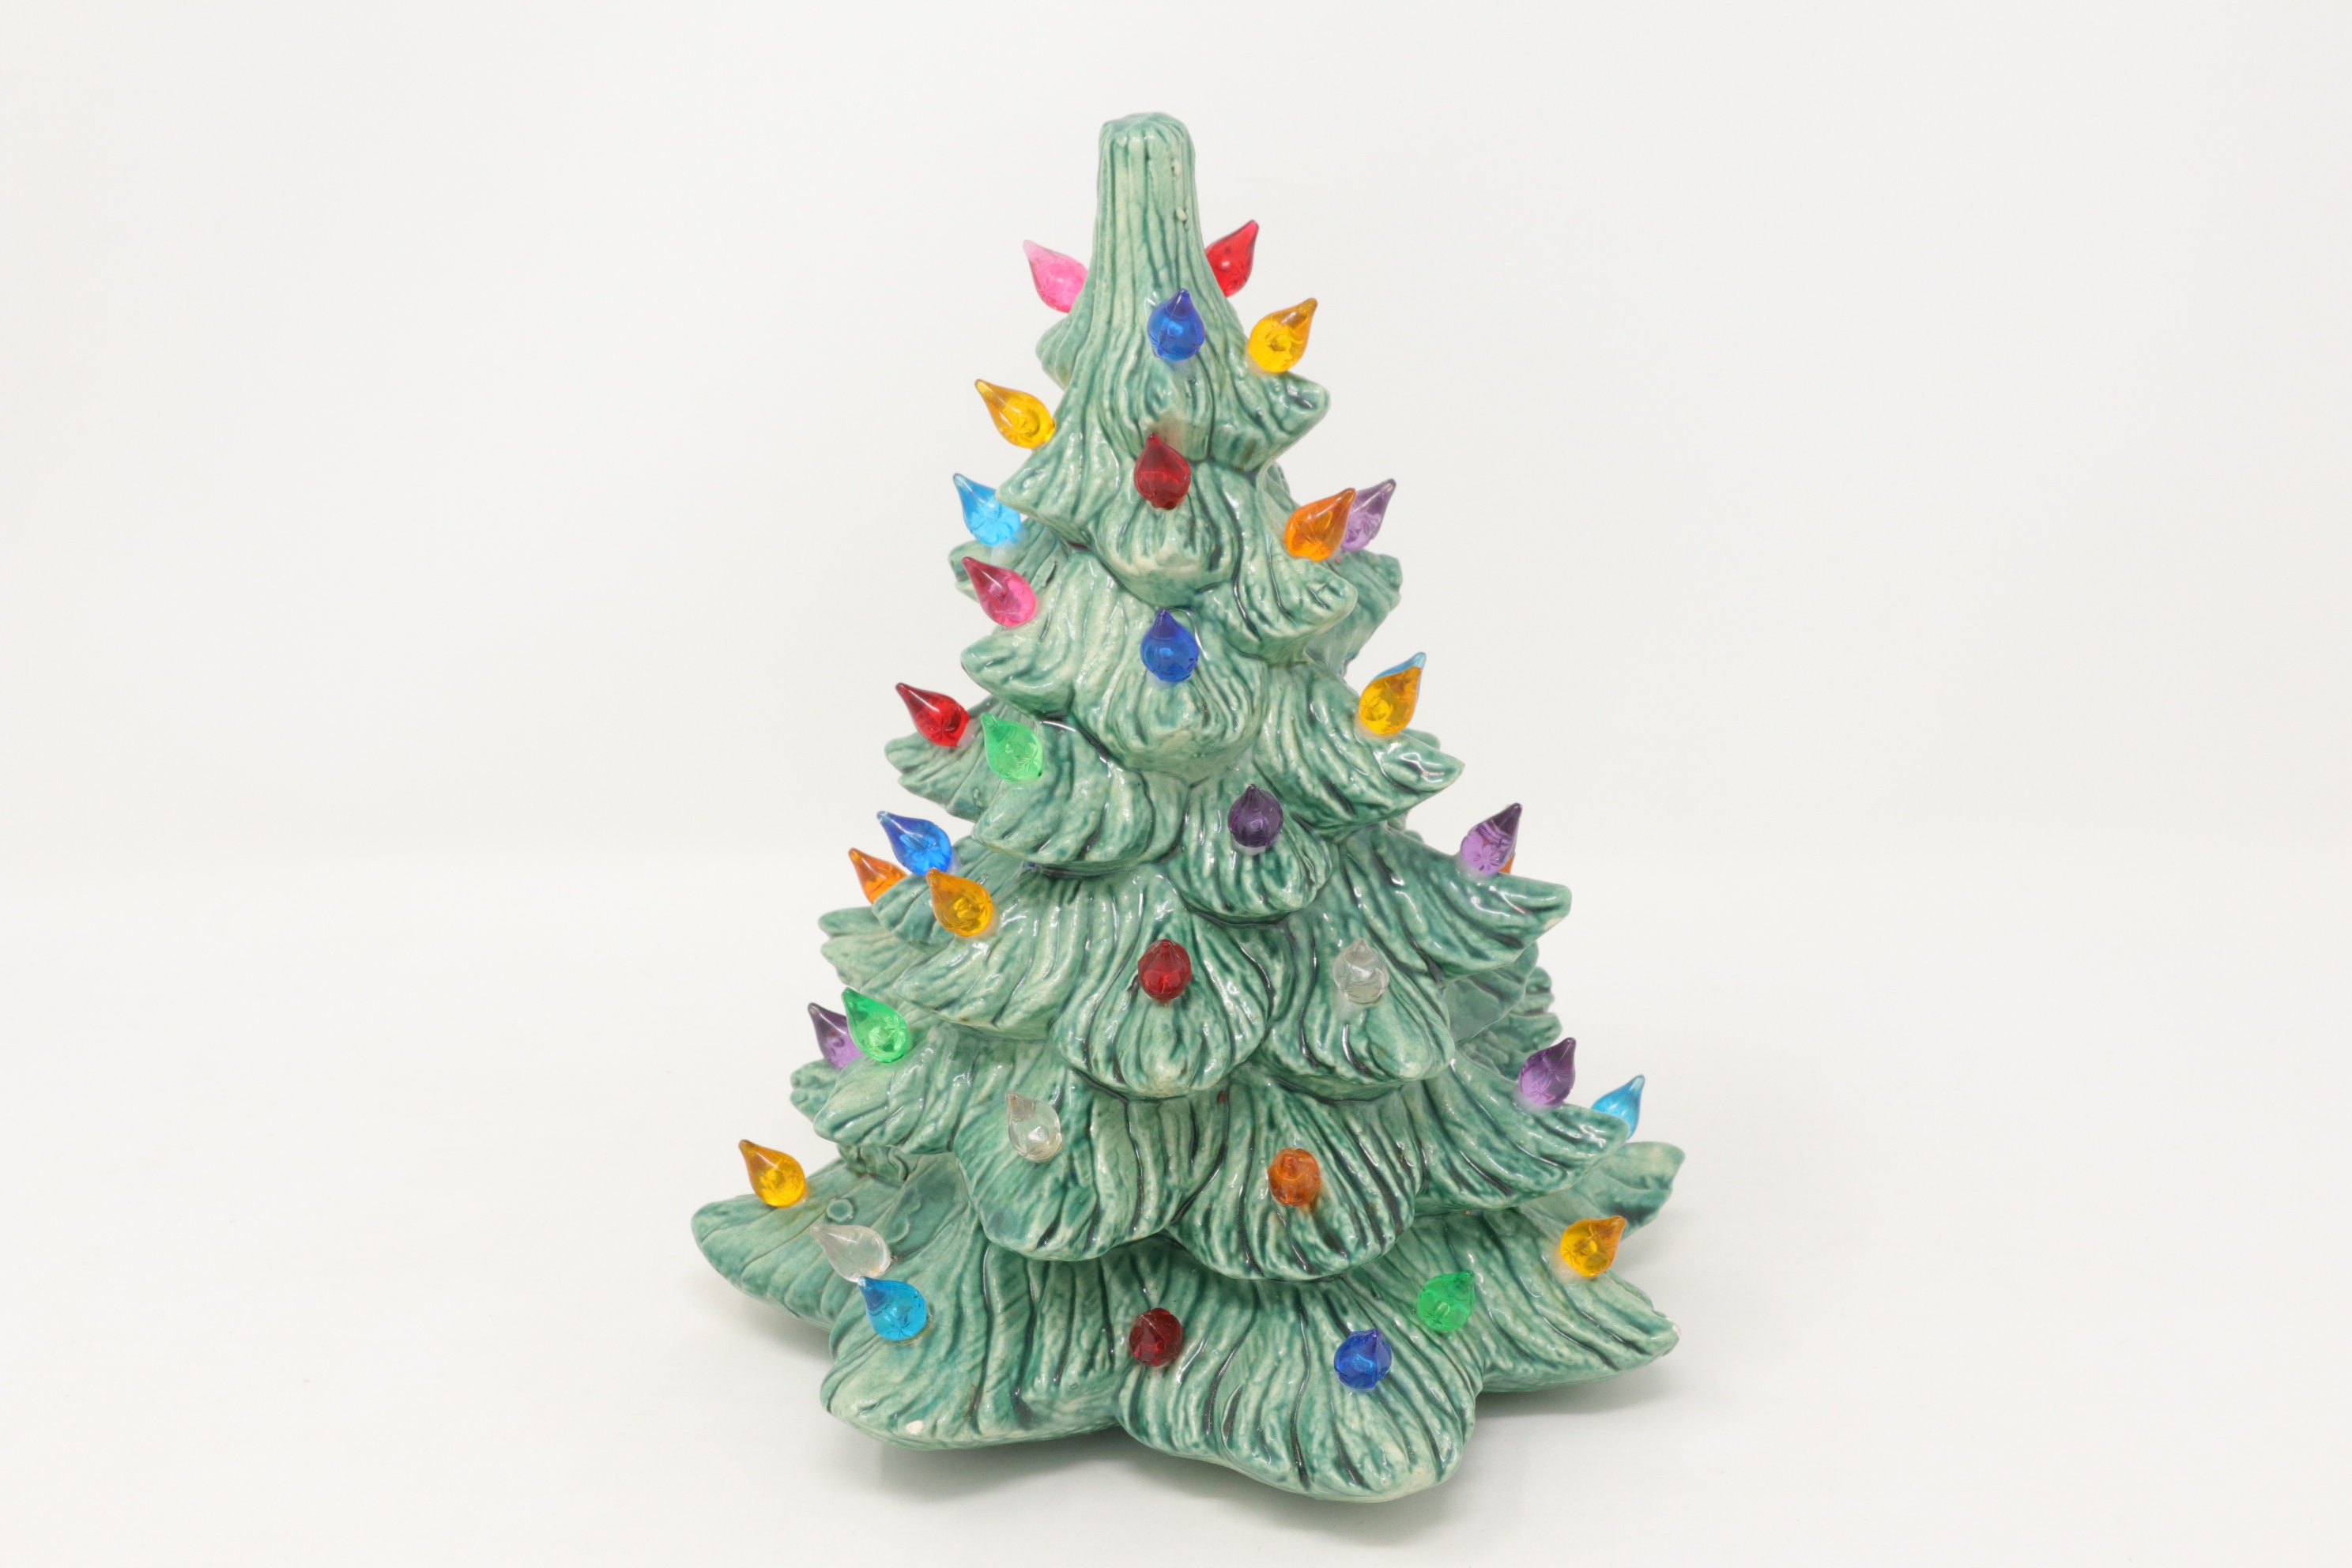 Ceramic Christmas Trees Are Back! - Suburble